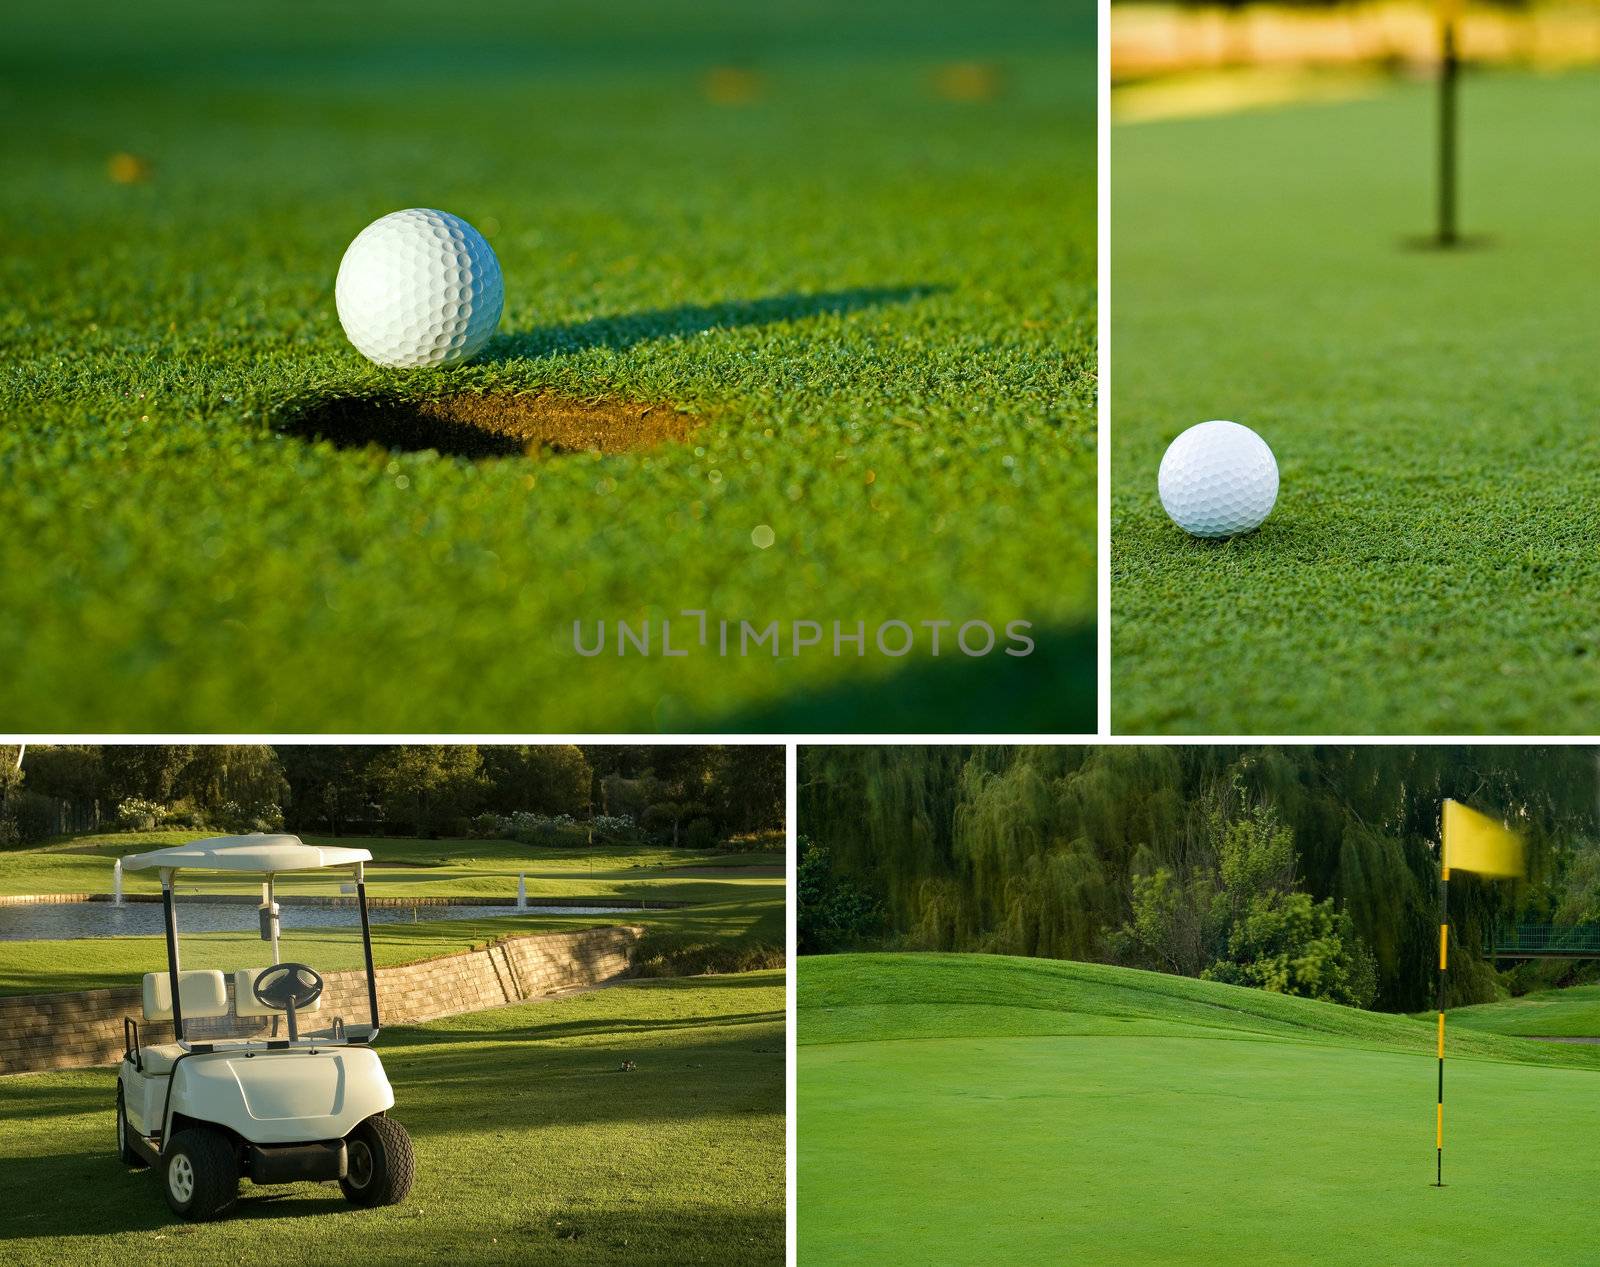 Various golf image collage of white golf ball on putting green next to hole, golf cart and flag